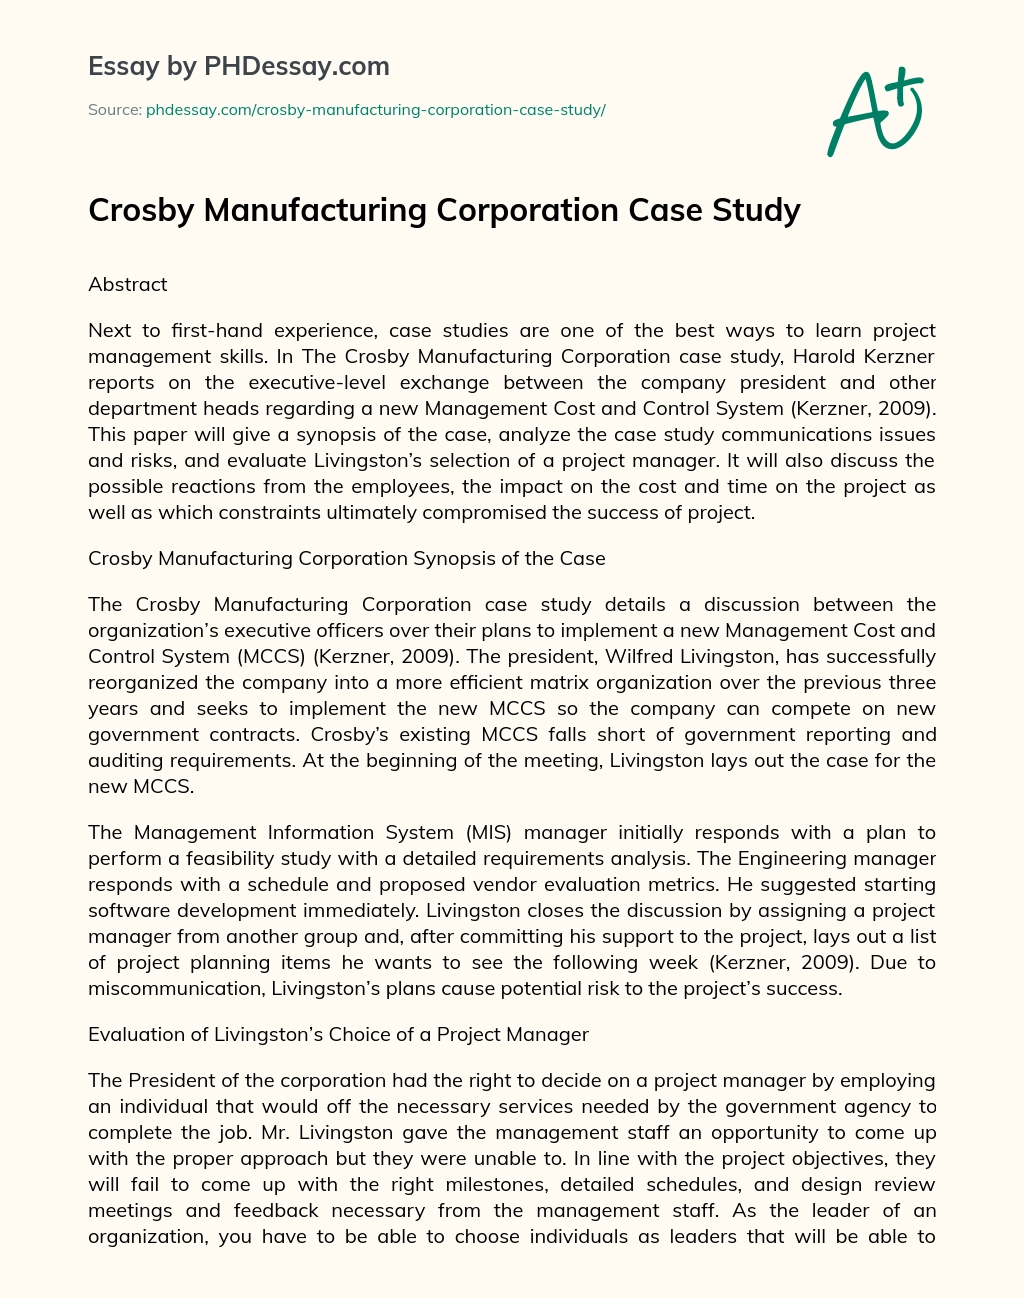 Crosby Manufacturing Corporation Case Study essay